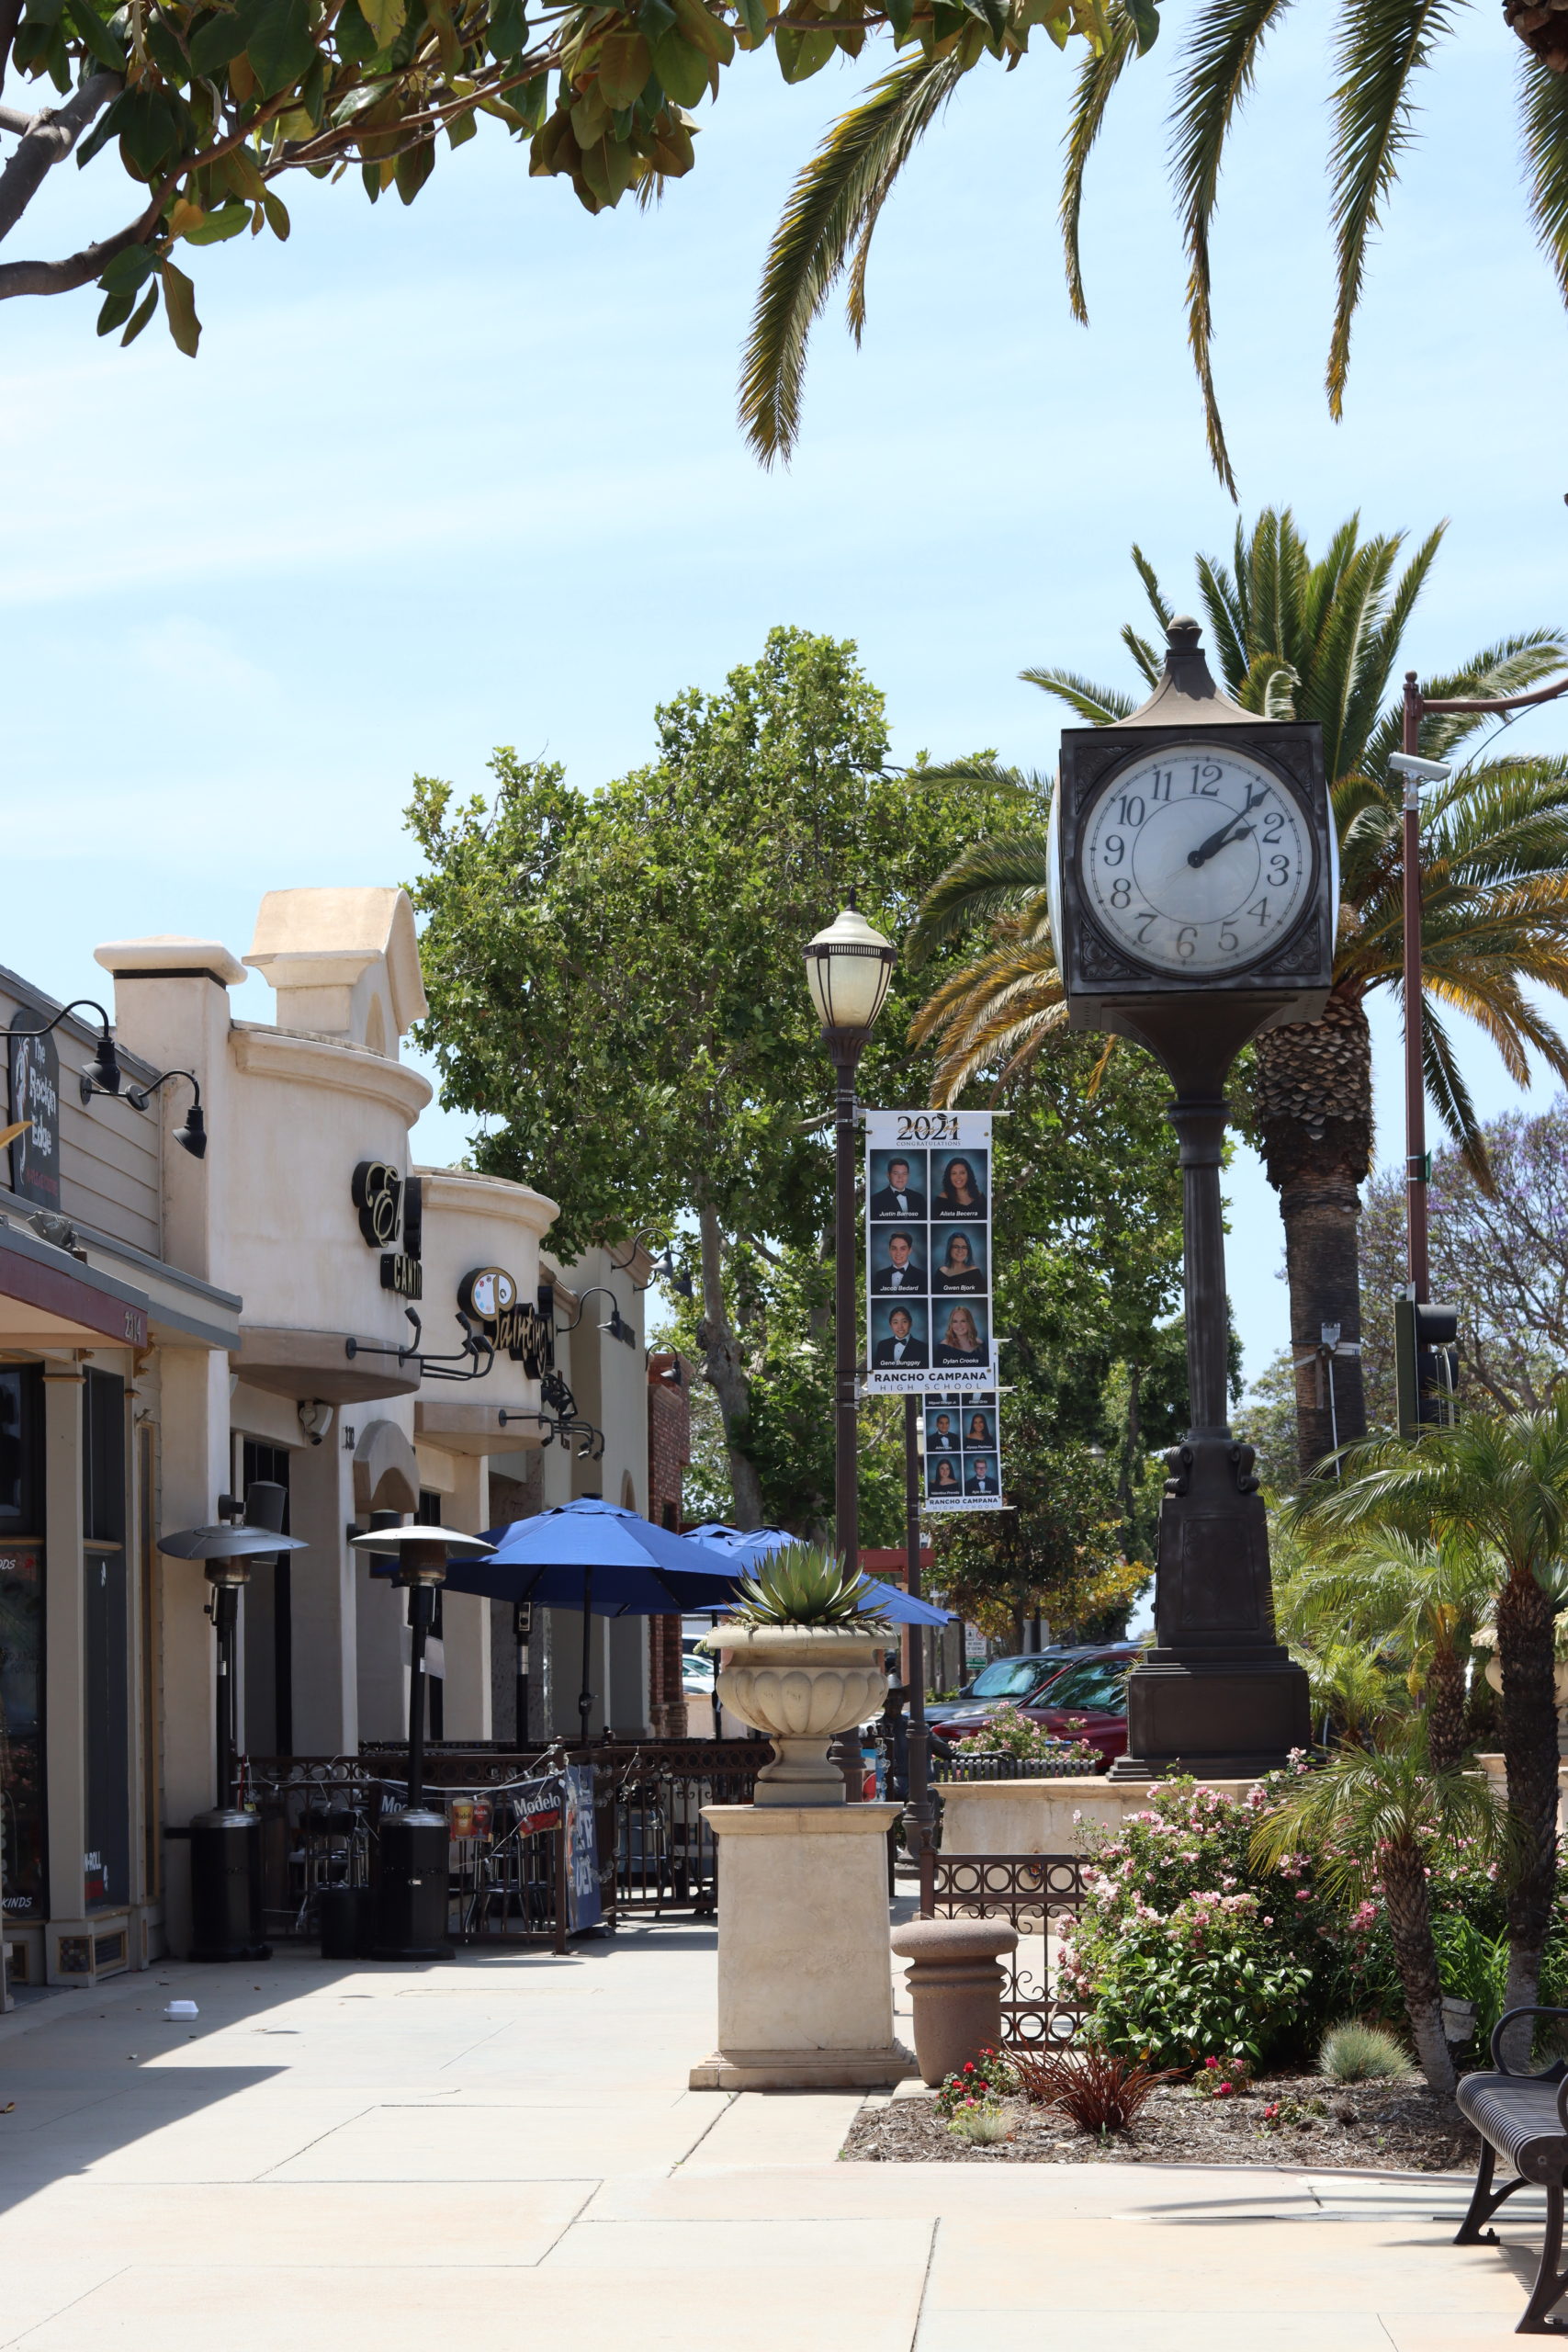 How to plan a fun filled visit to Camarillo, California - Happily Dwell